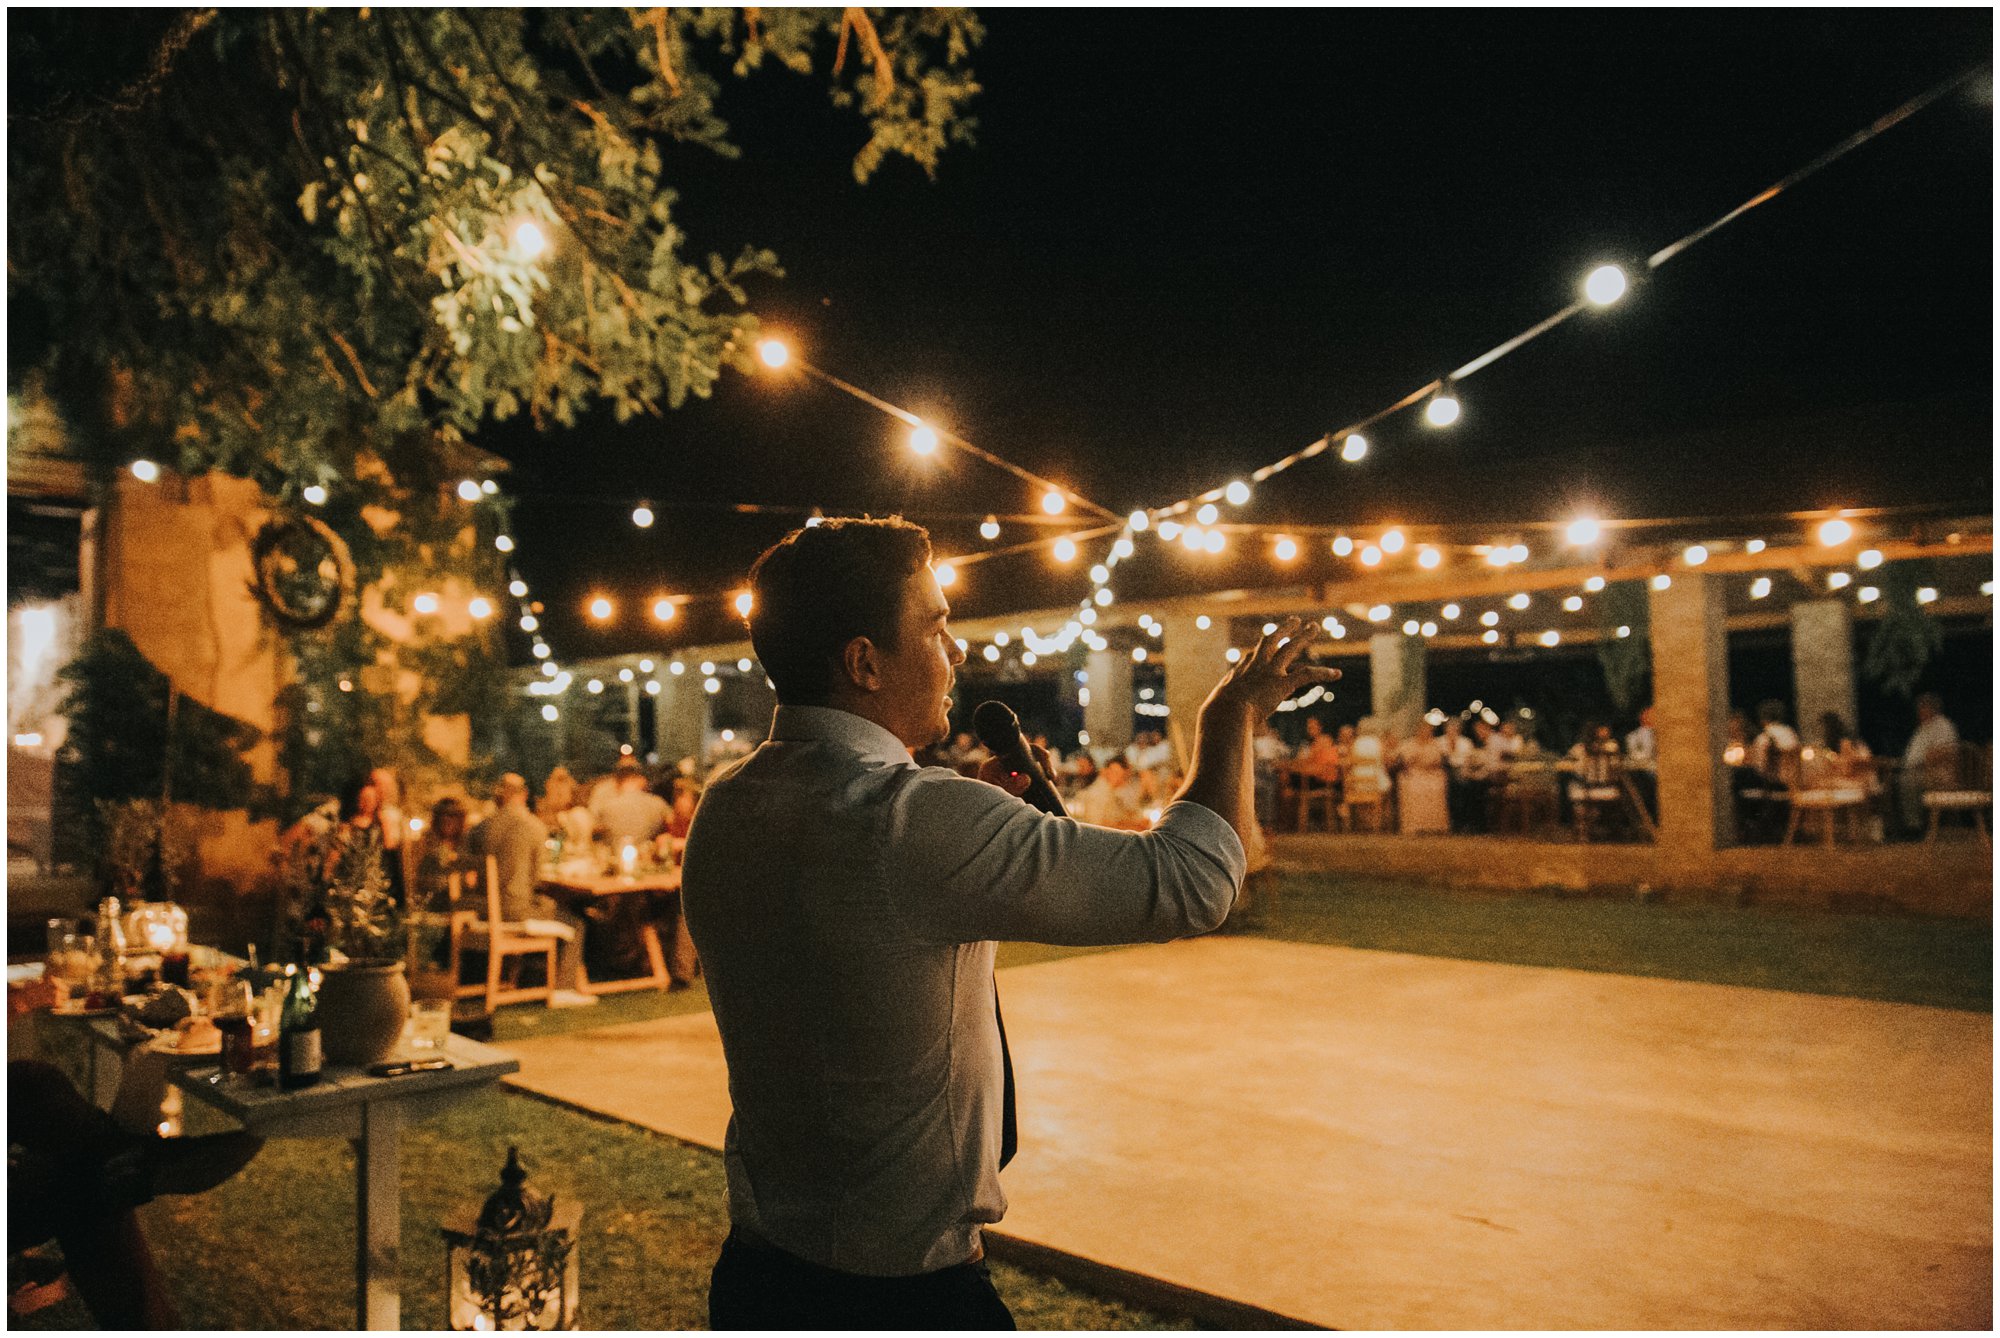 Outdoor Bohemian Destination Wedding at Francine’s Venue in Hoedspruit Limpopo by Junebug World's Best Photographer Maryke Albertyn Award Winning International Alternative Moody Photography based in Cape Town South Africa